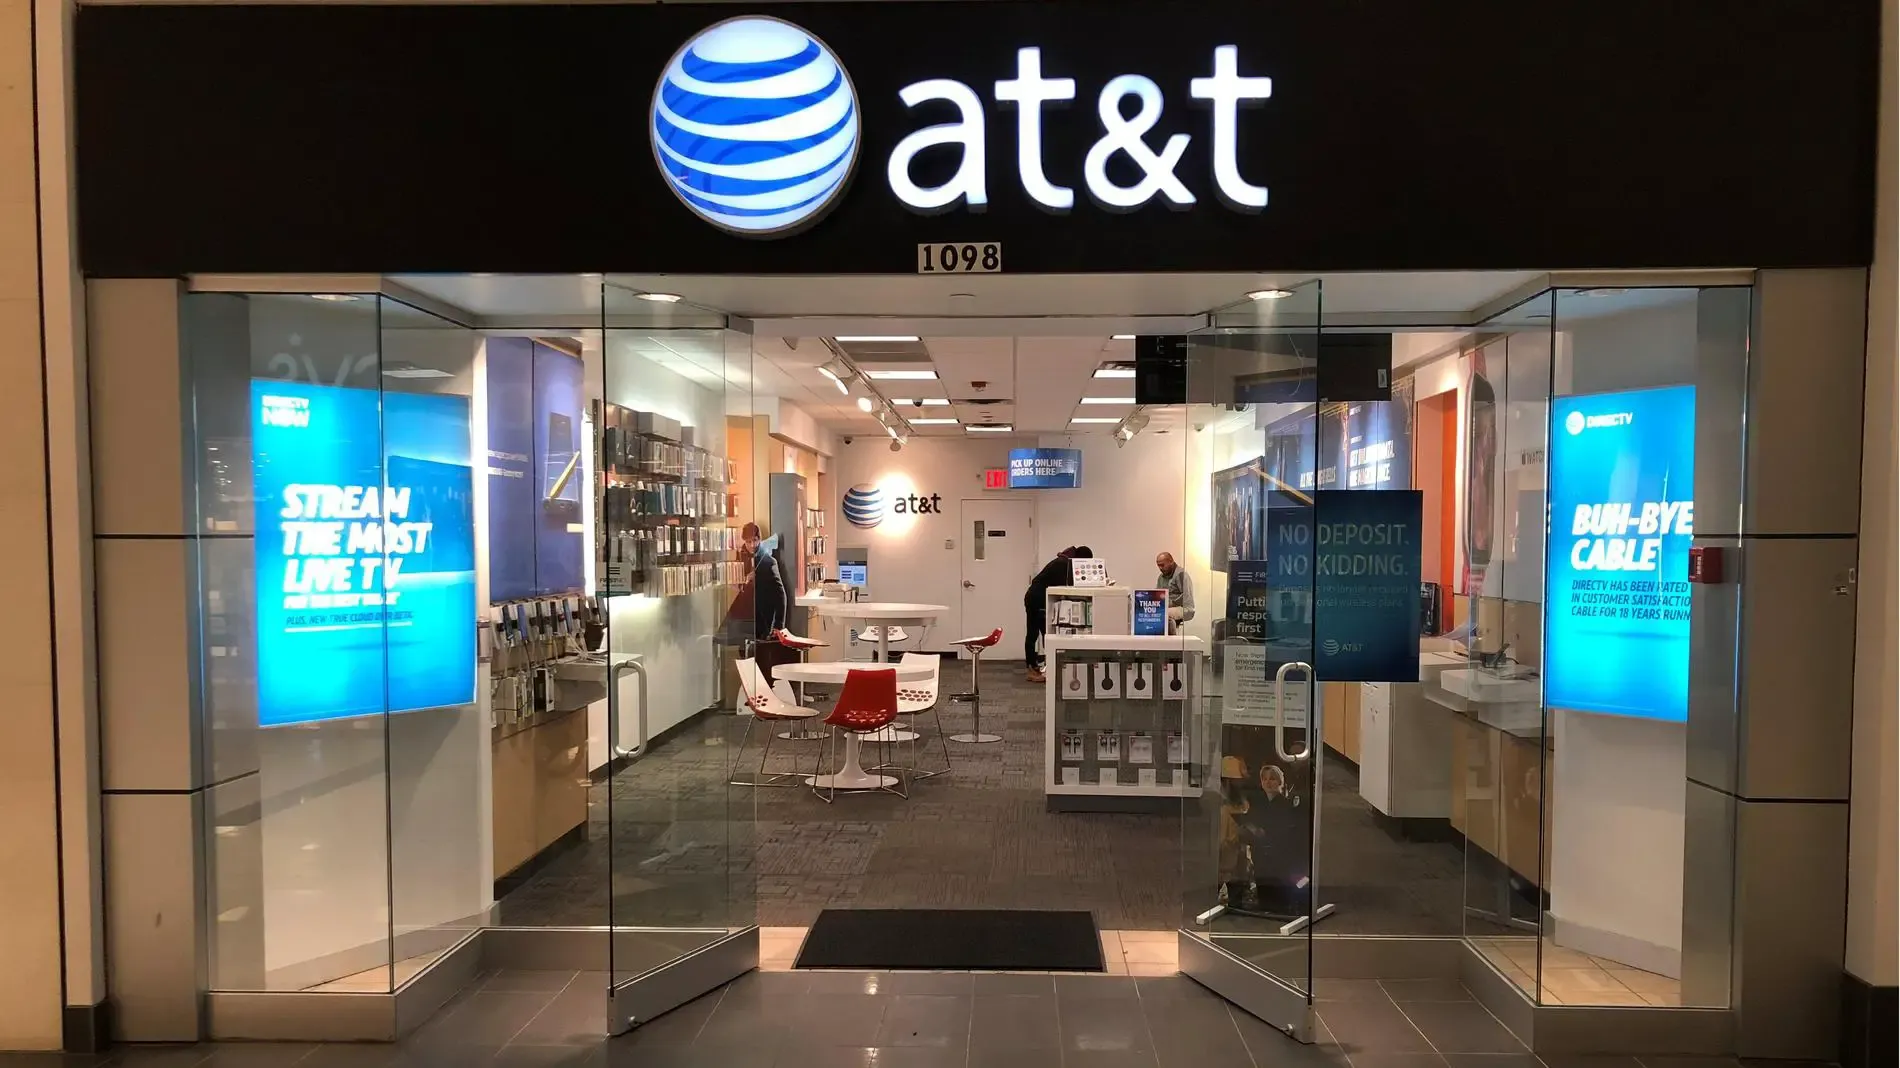 How to Find AT&T Stores Hours Online